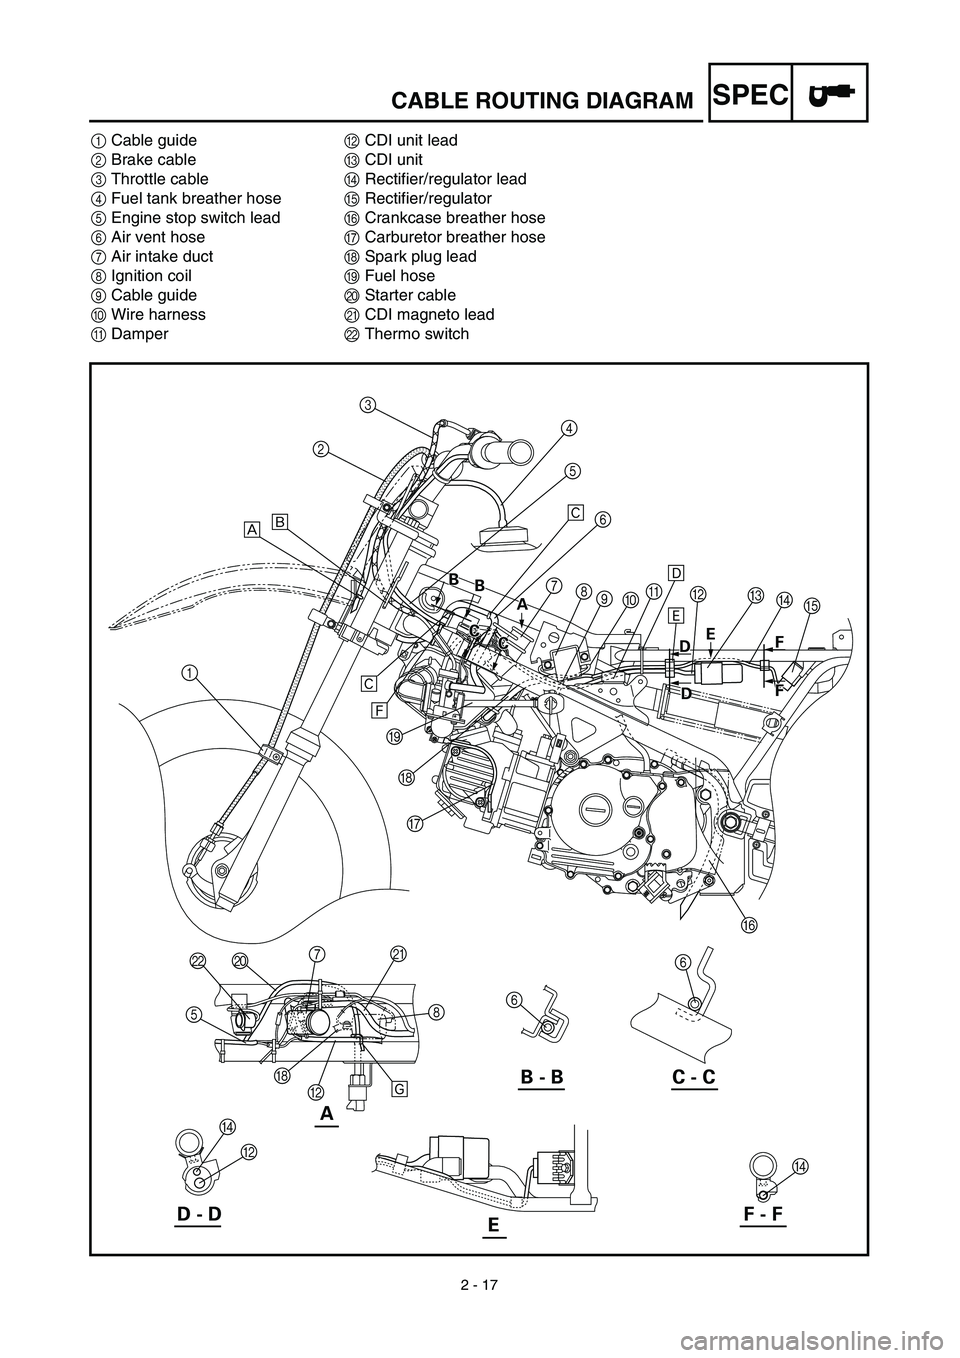 YAMAHA TTR90 2003  Notices Demploi (in French) 2 - 17
SPECCABLE ROUTING DIAGRAM
1Cable guide
2Brake cable
3Throttle cable
4Fuel tank breather hose
5Engine stop switch lead
6Air vent hose
7Air intake duct
8Ignition coil
9Cable guide
0Wire harness
A